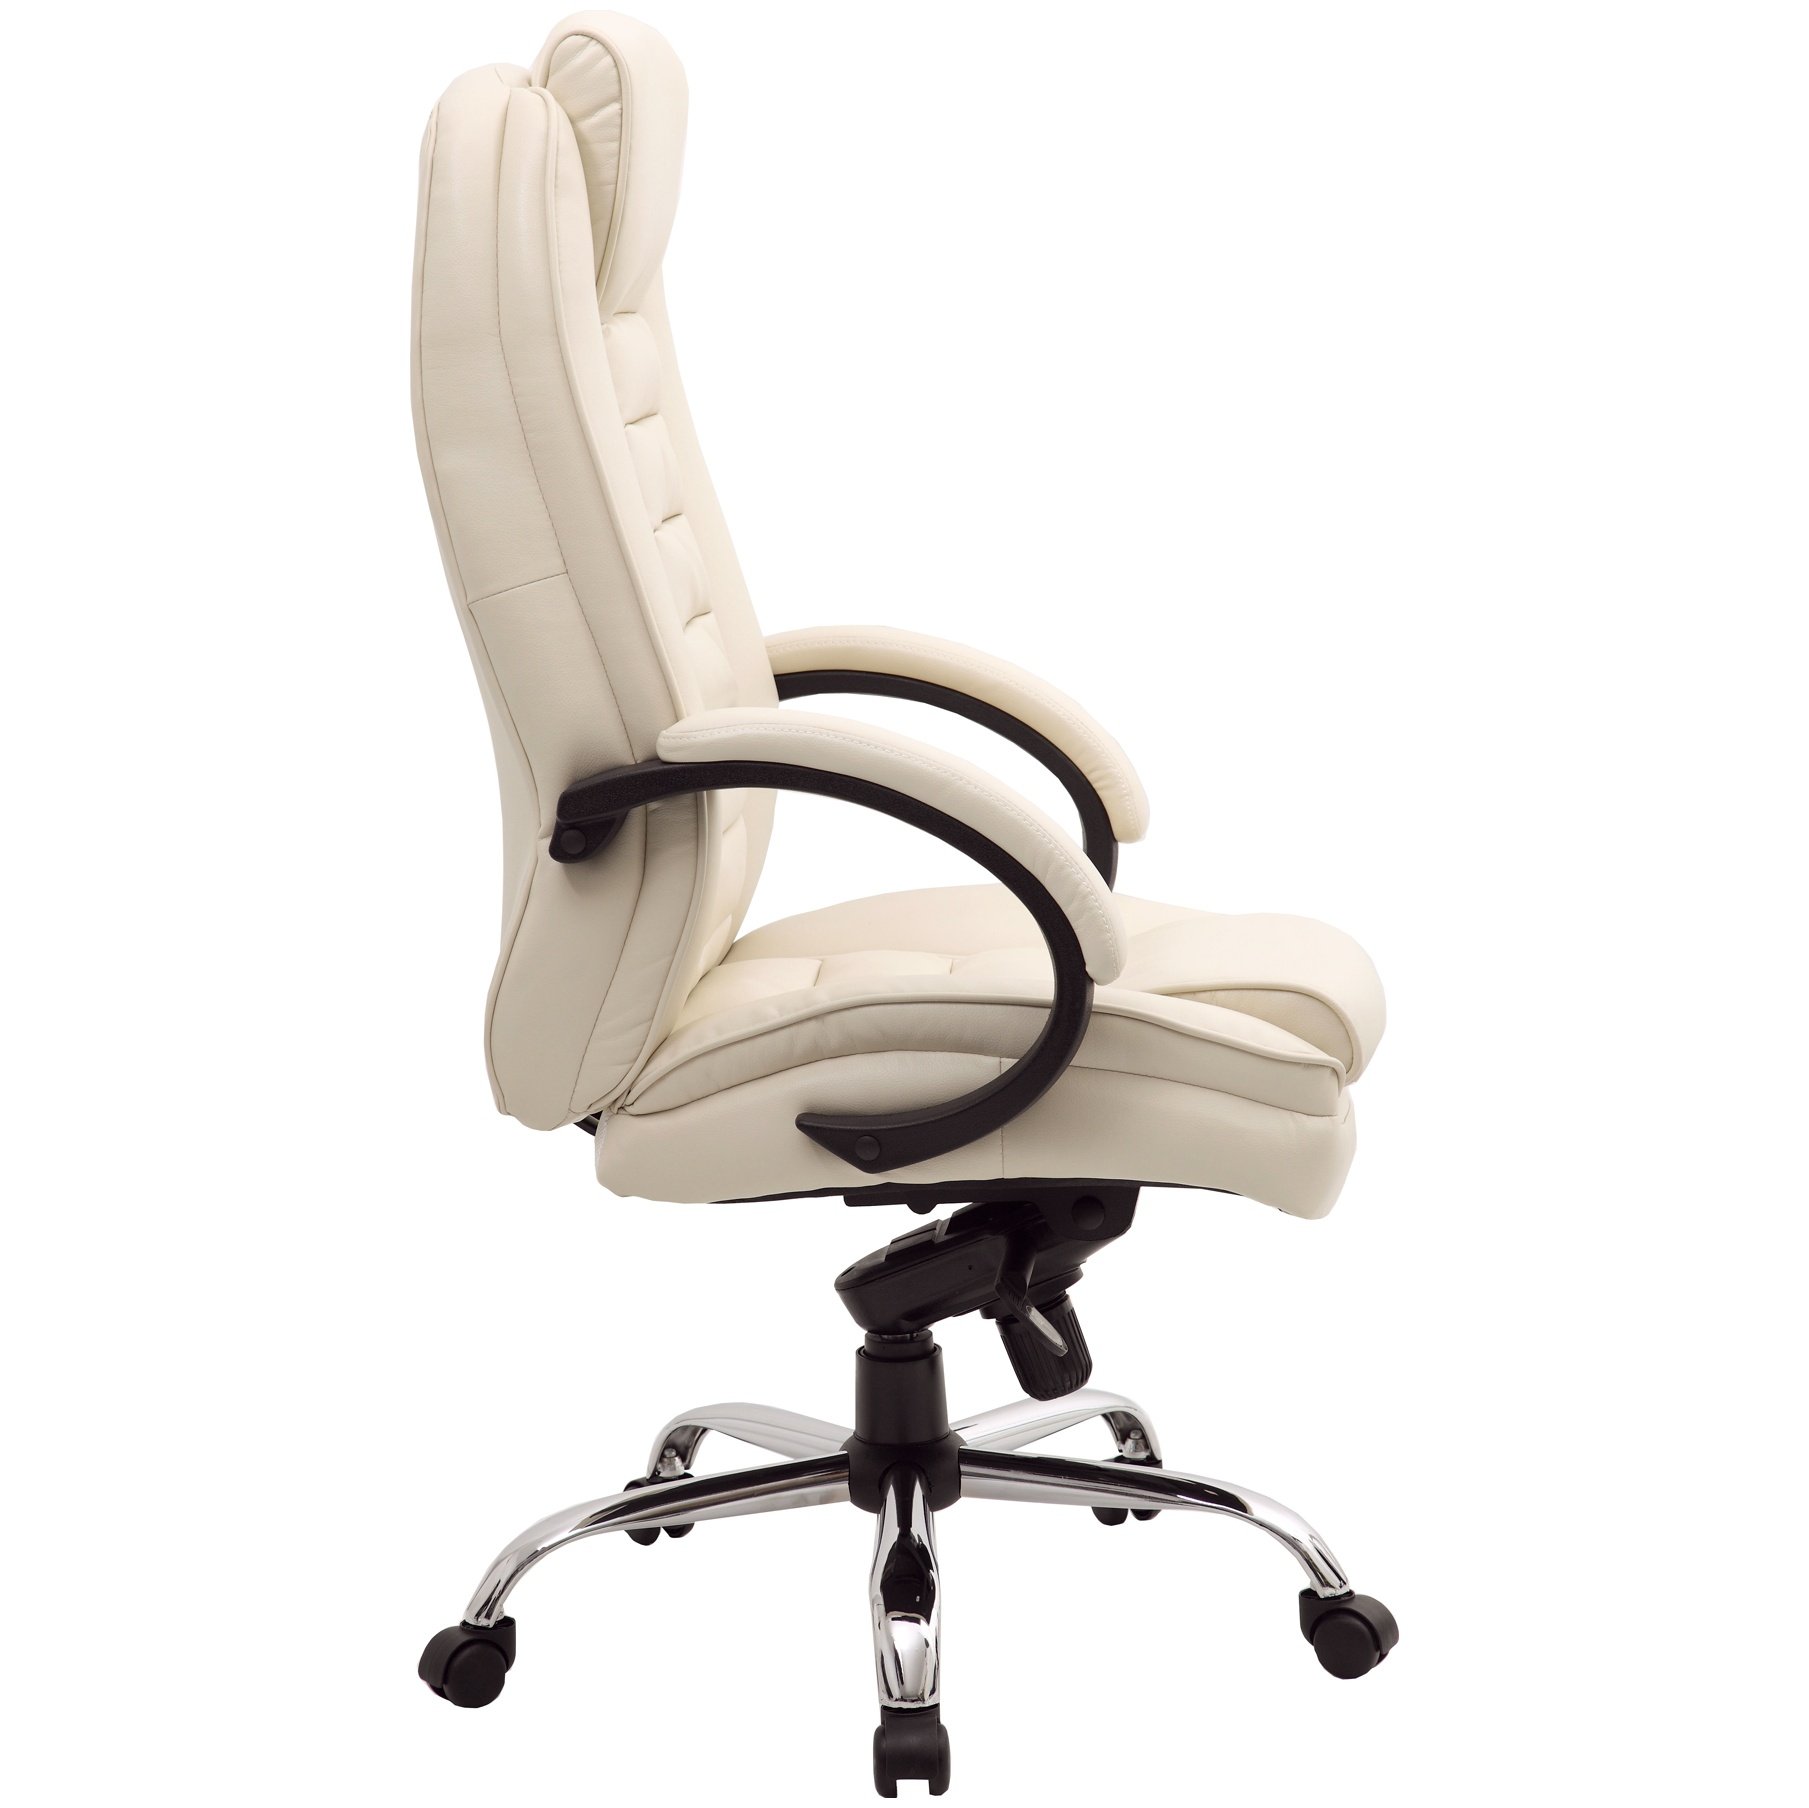 Lucca Cream Executive Leather Office Chairs Free UK Delivery